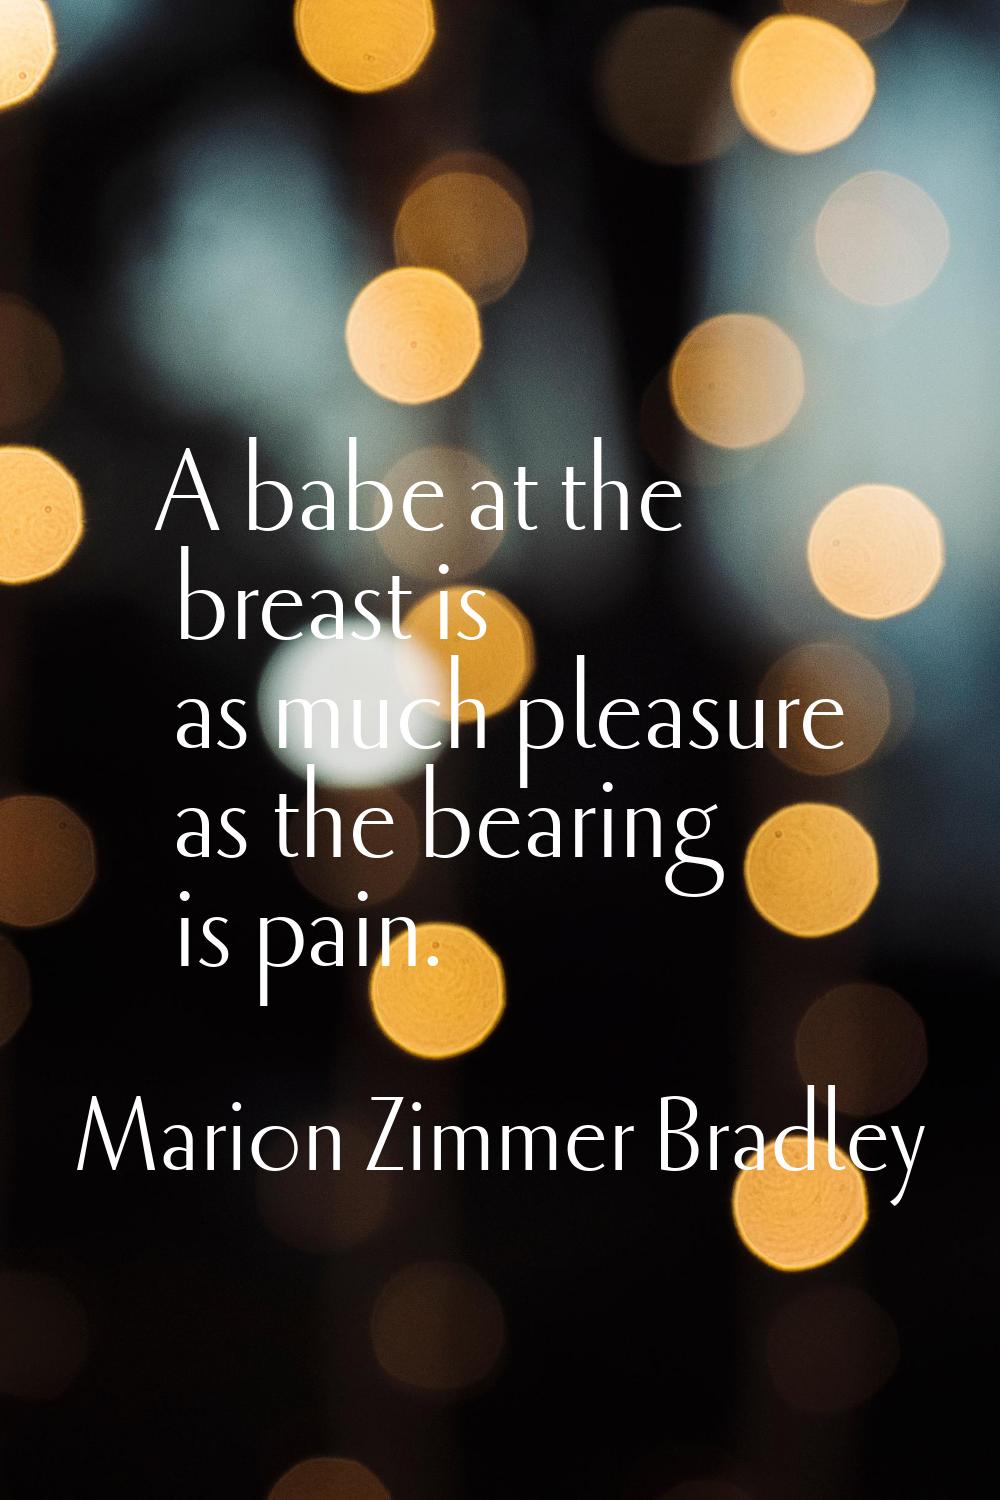 A babe at the breast is as much pleasure as the bearing is pain.